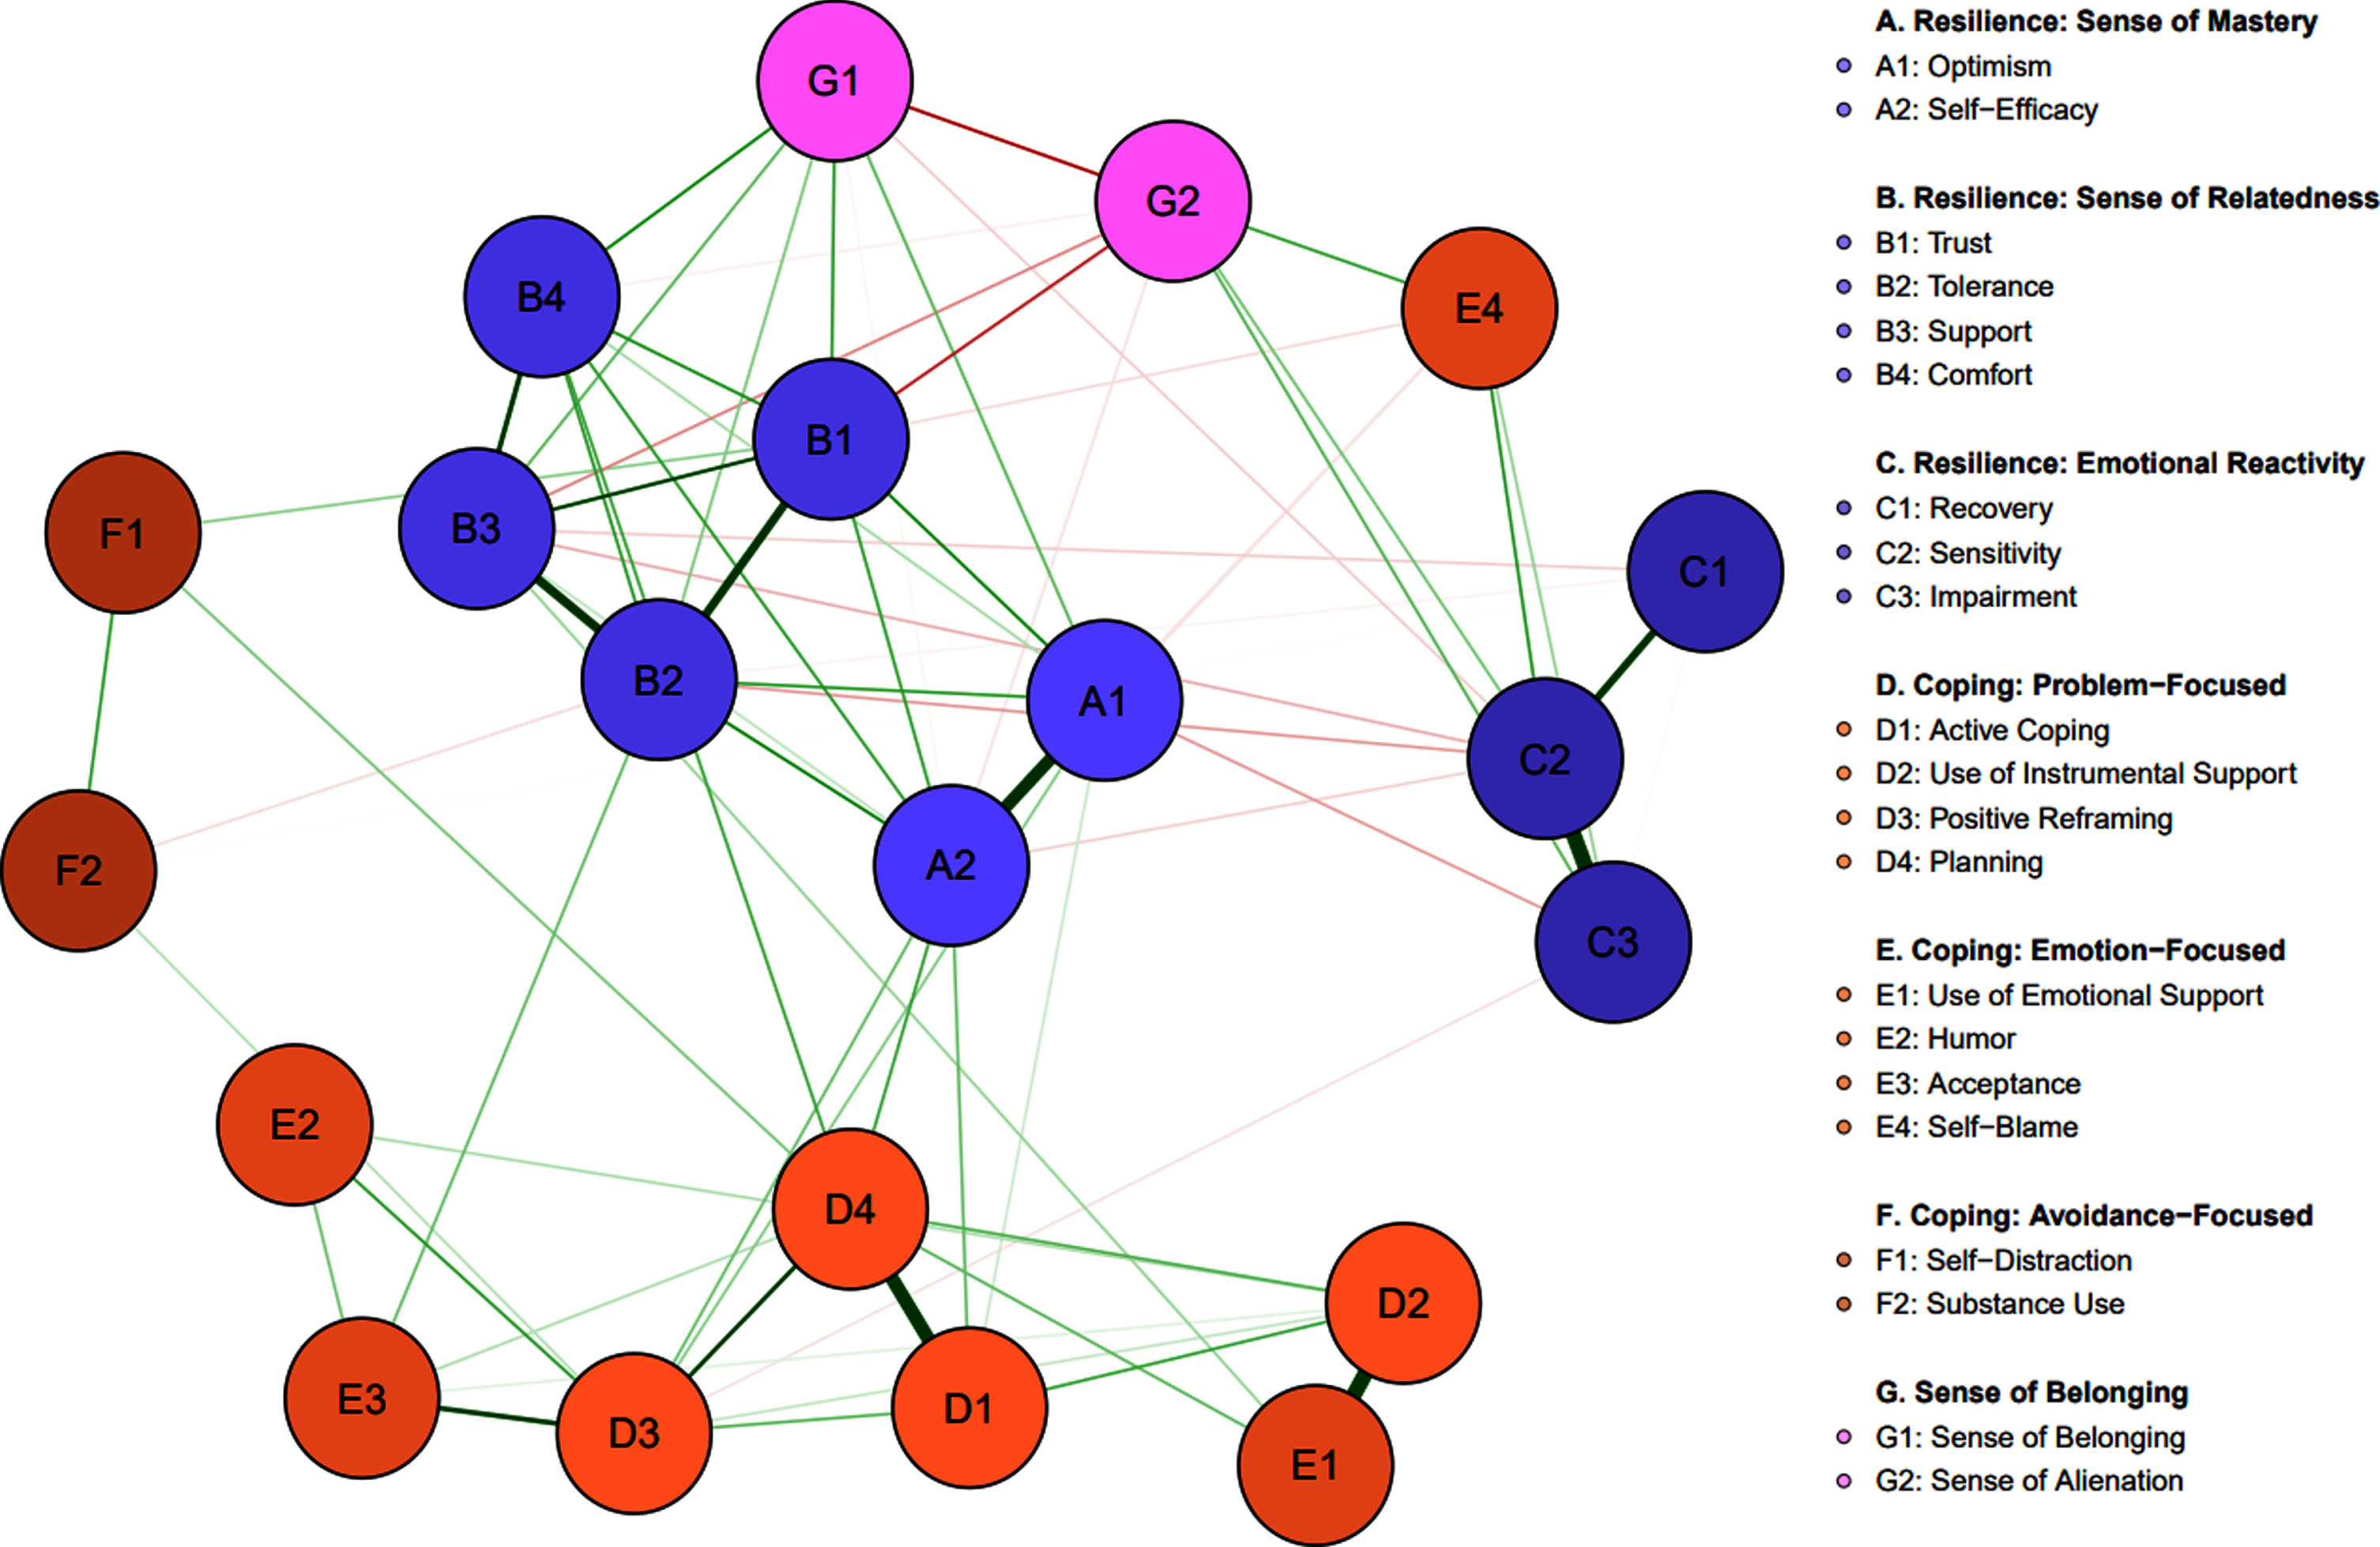 Visualized partial correlation network.Note. Visualized partial correlation network of resilience (A1-C3), coping (D1-F2), and SoB (G1-G2). The lines between the nodes represent edges, green represents a positive association and red represents a negative association. The thicker the line, the stronger the partial corrections for that edge. The absence of an edge indicates no correlation between the respective nodes when controlling for all other nodes in the network.